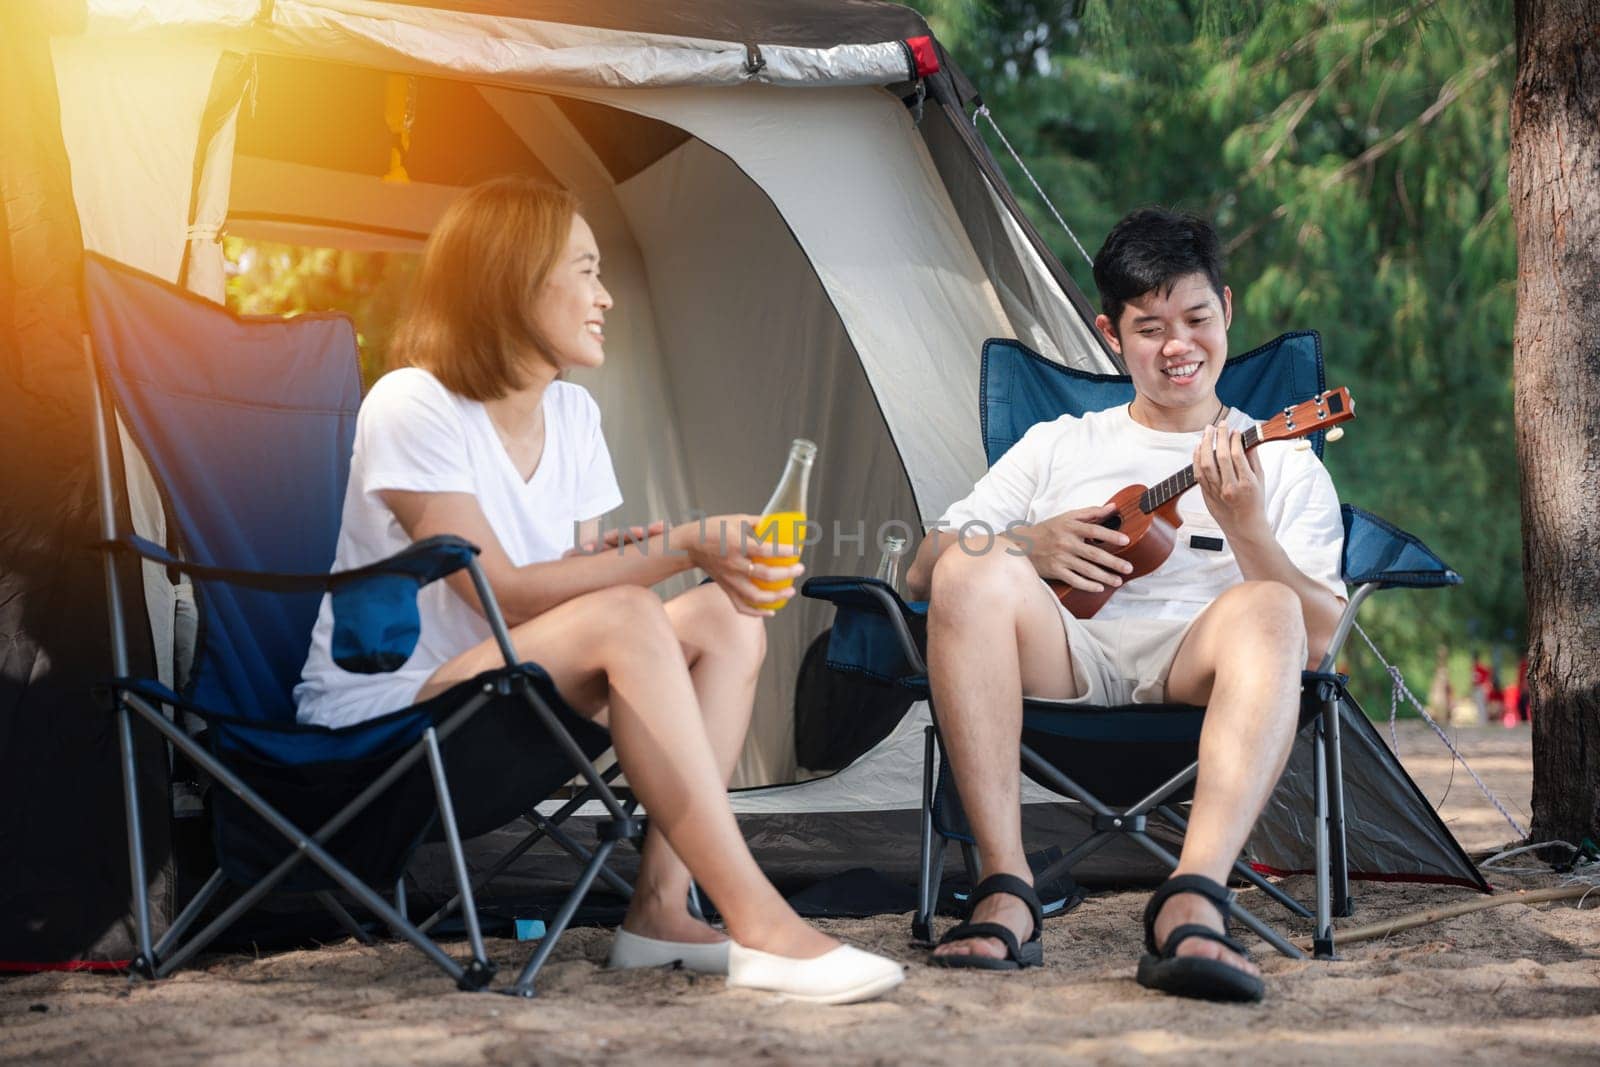 An outdoor serenade, A beaming Asian couple, by their tent, shares a song on the ukulele, capturing the essence of togetherness and happiness. Music and love unite at the campsite. Camping putdoor by Sorapop